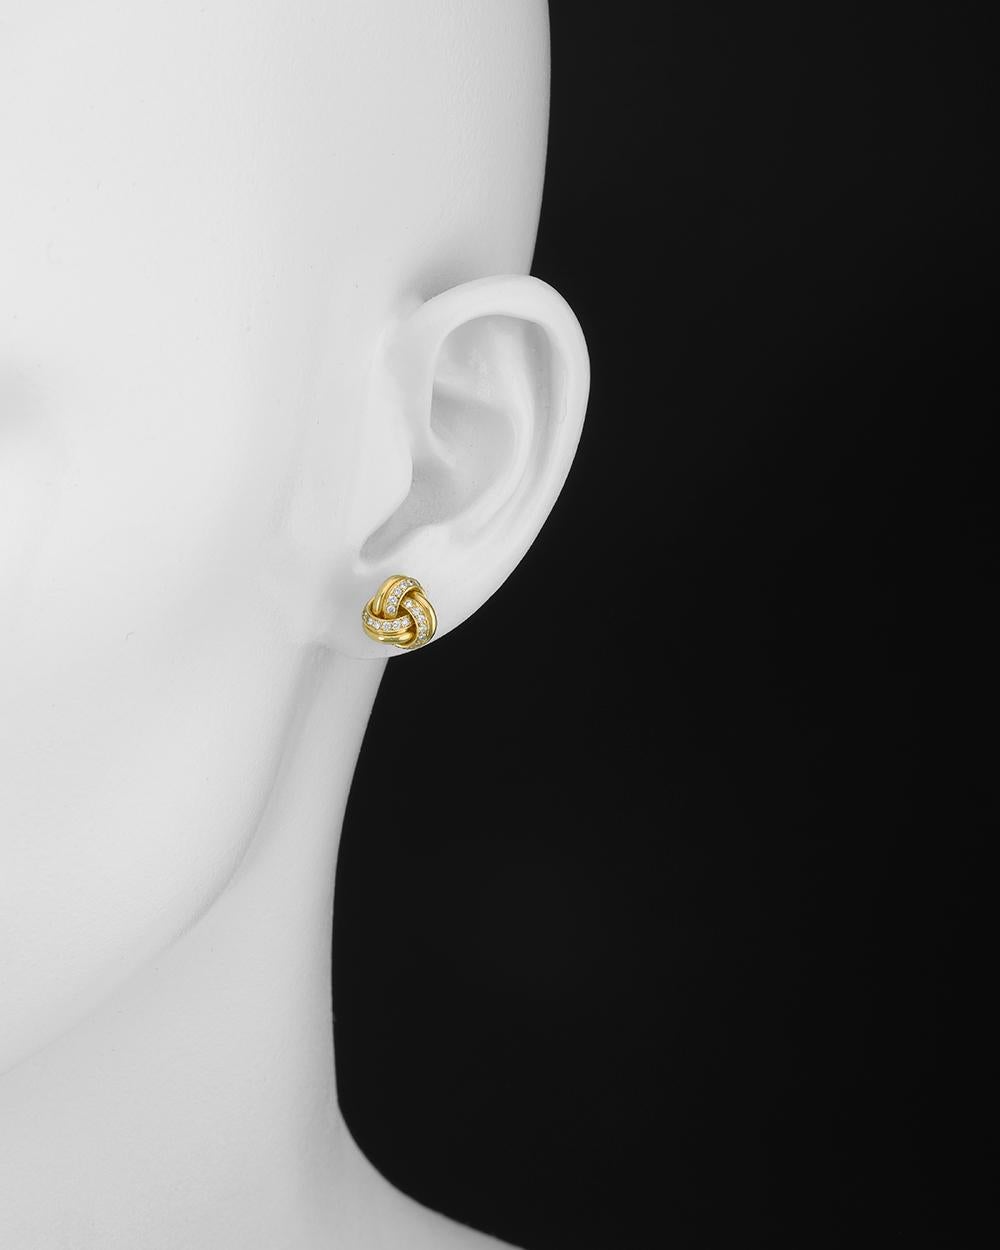 Three-loop knot earstuds in polished 18k yellow gold with pavé diamonds. Round-cut diamonds weighing 0.35 total carats. Posts with friction backs for pierced ears. 0.43